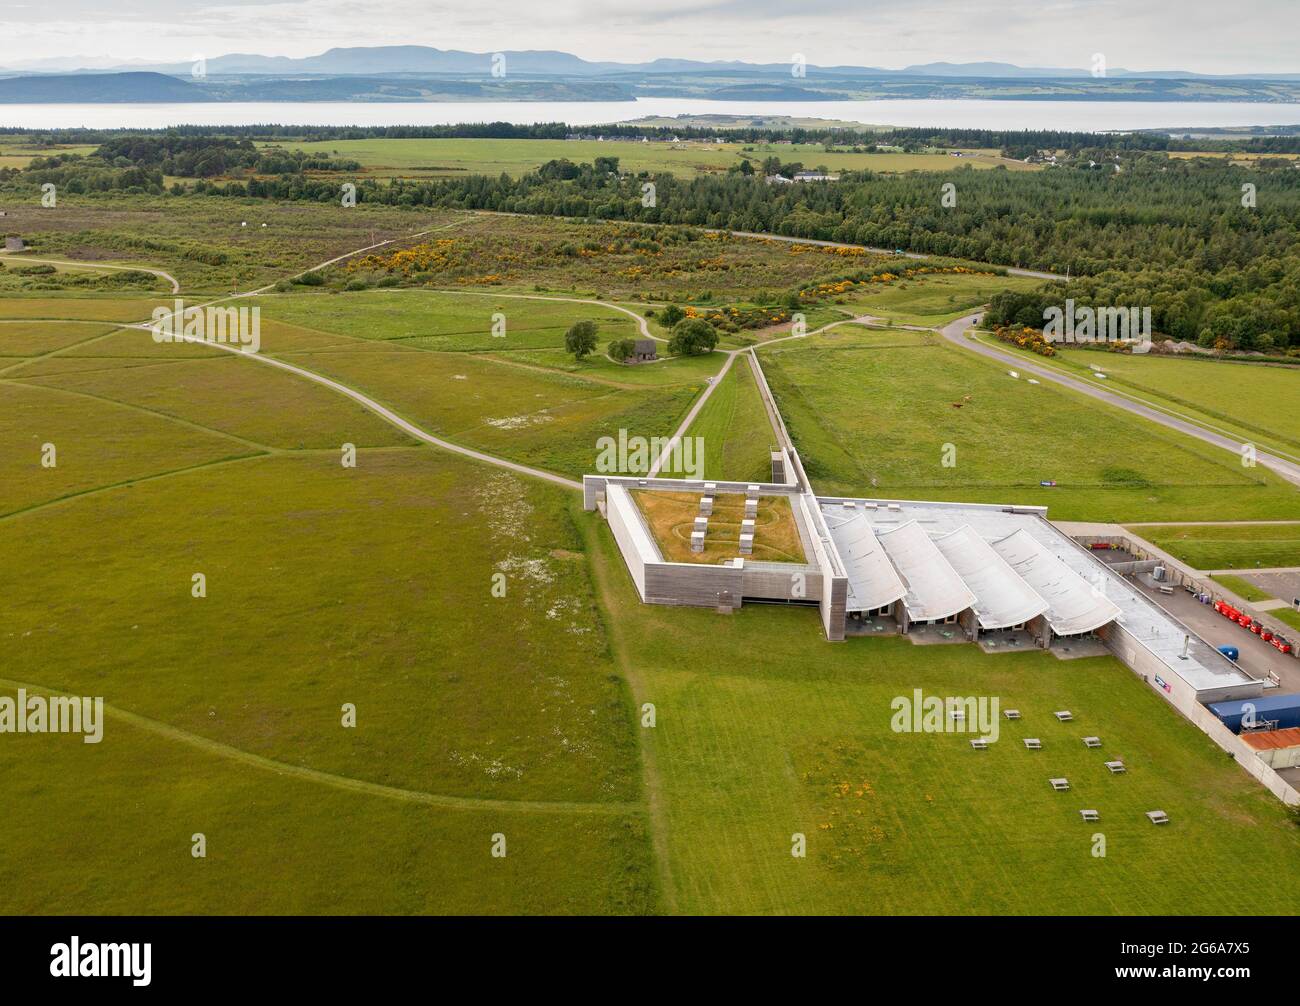 Aerial view of the Culloden Moor battlefield, Inverness-shire, Scotland, scene of the Battle of Culloden Moor in 1746. Stock Photo